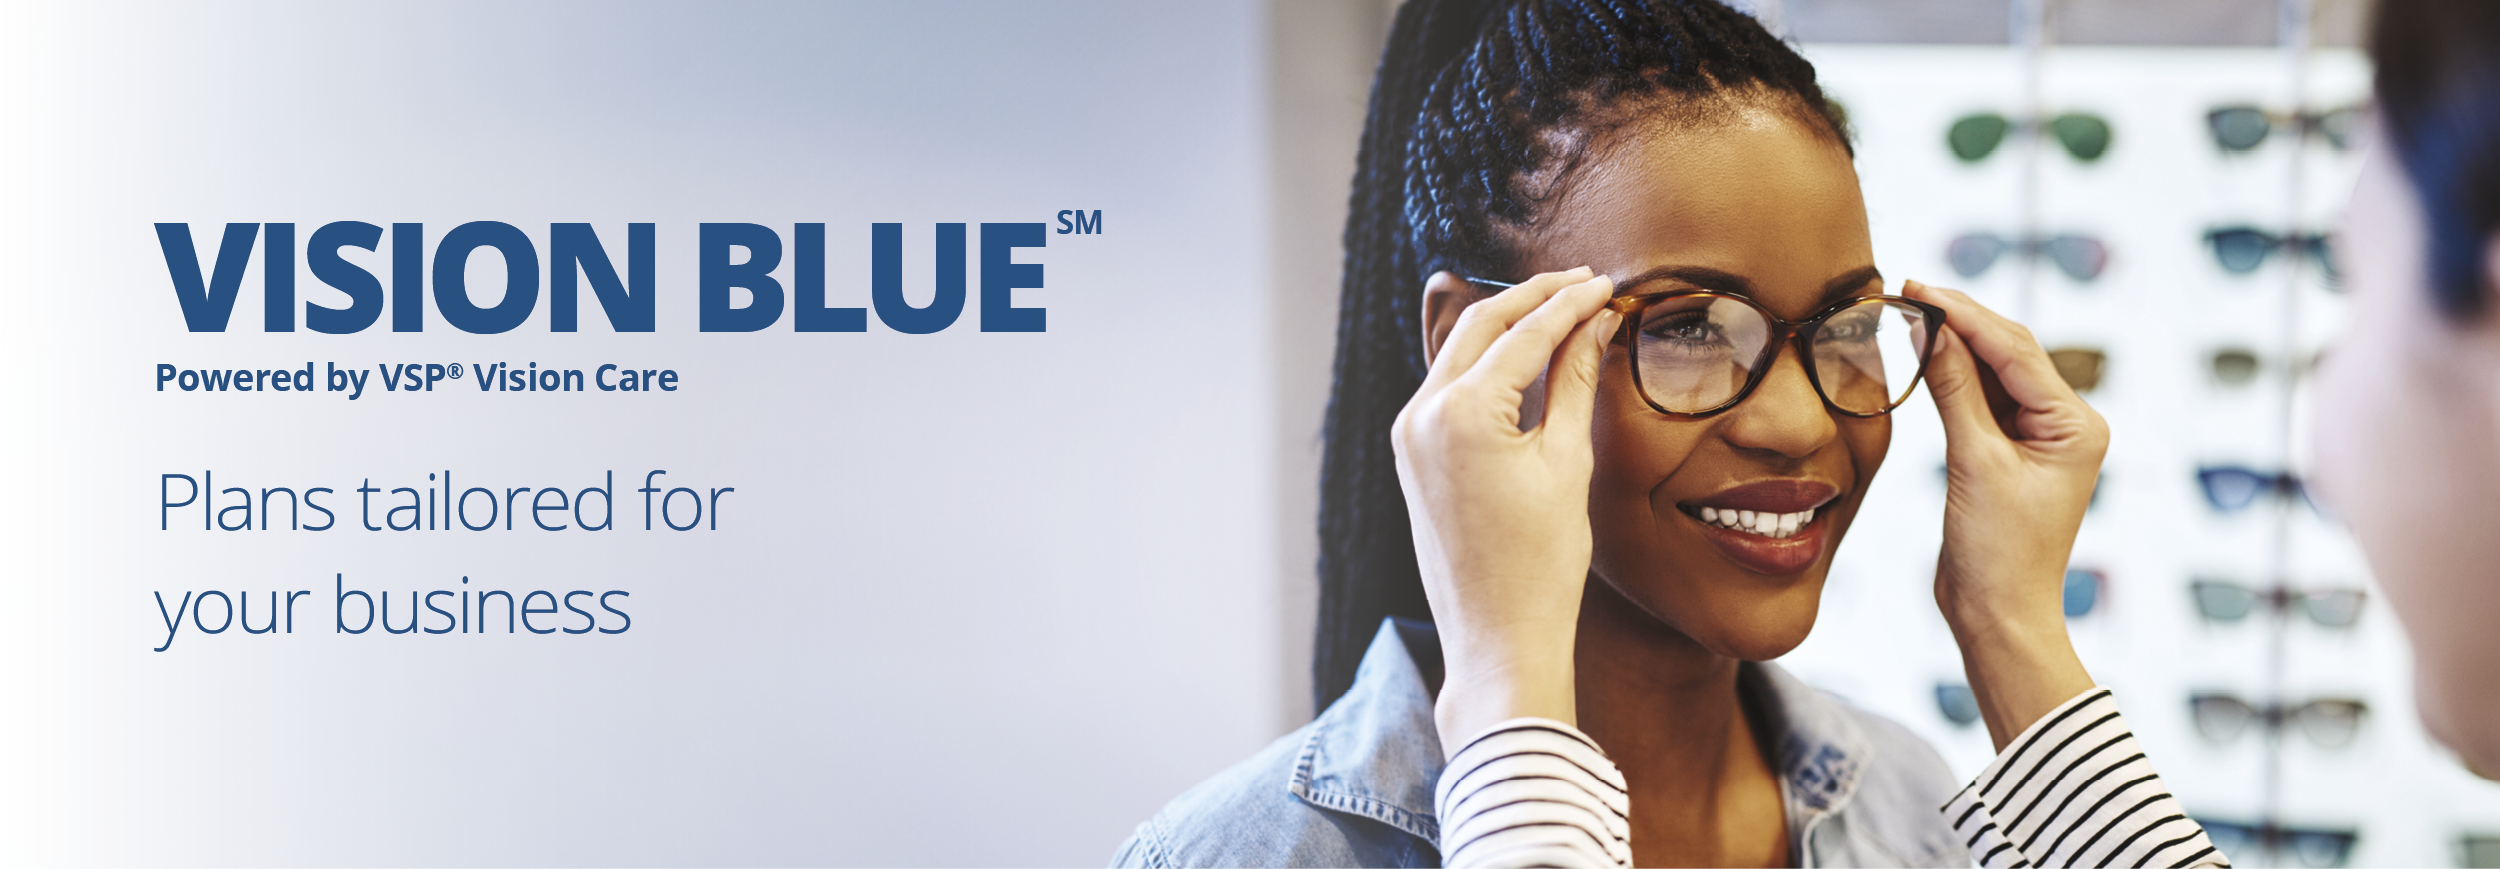 Vision Blue - Plans Tailored For Your Business.